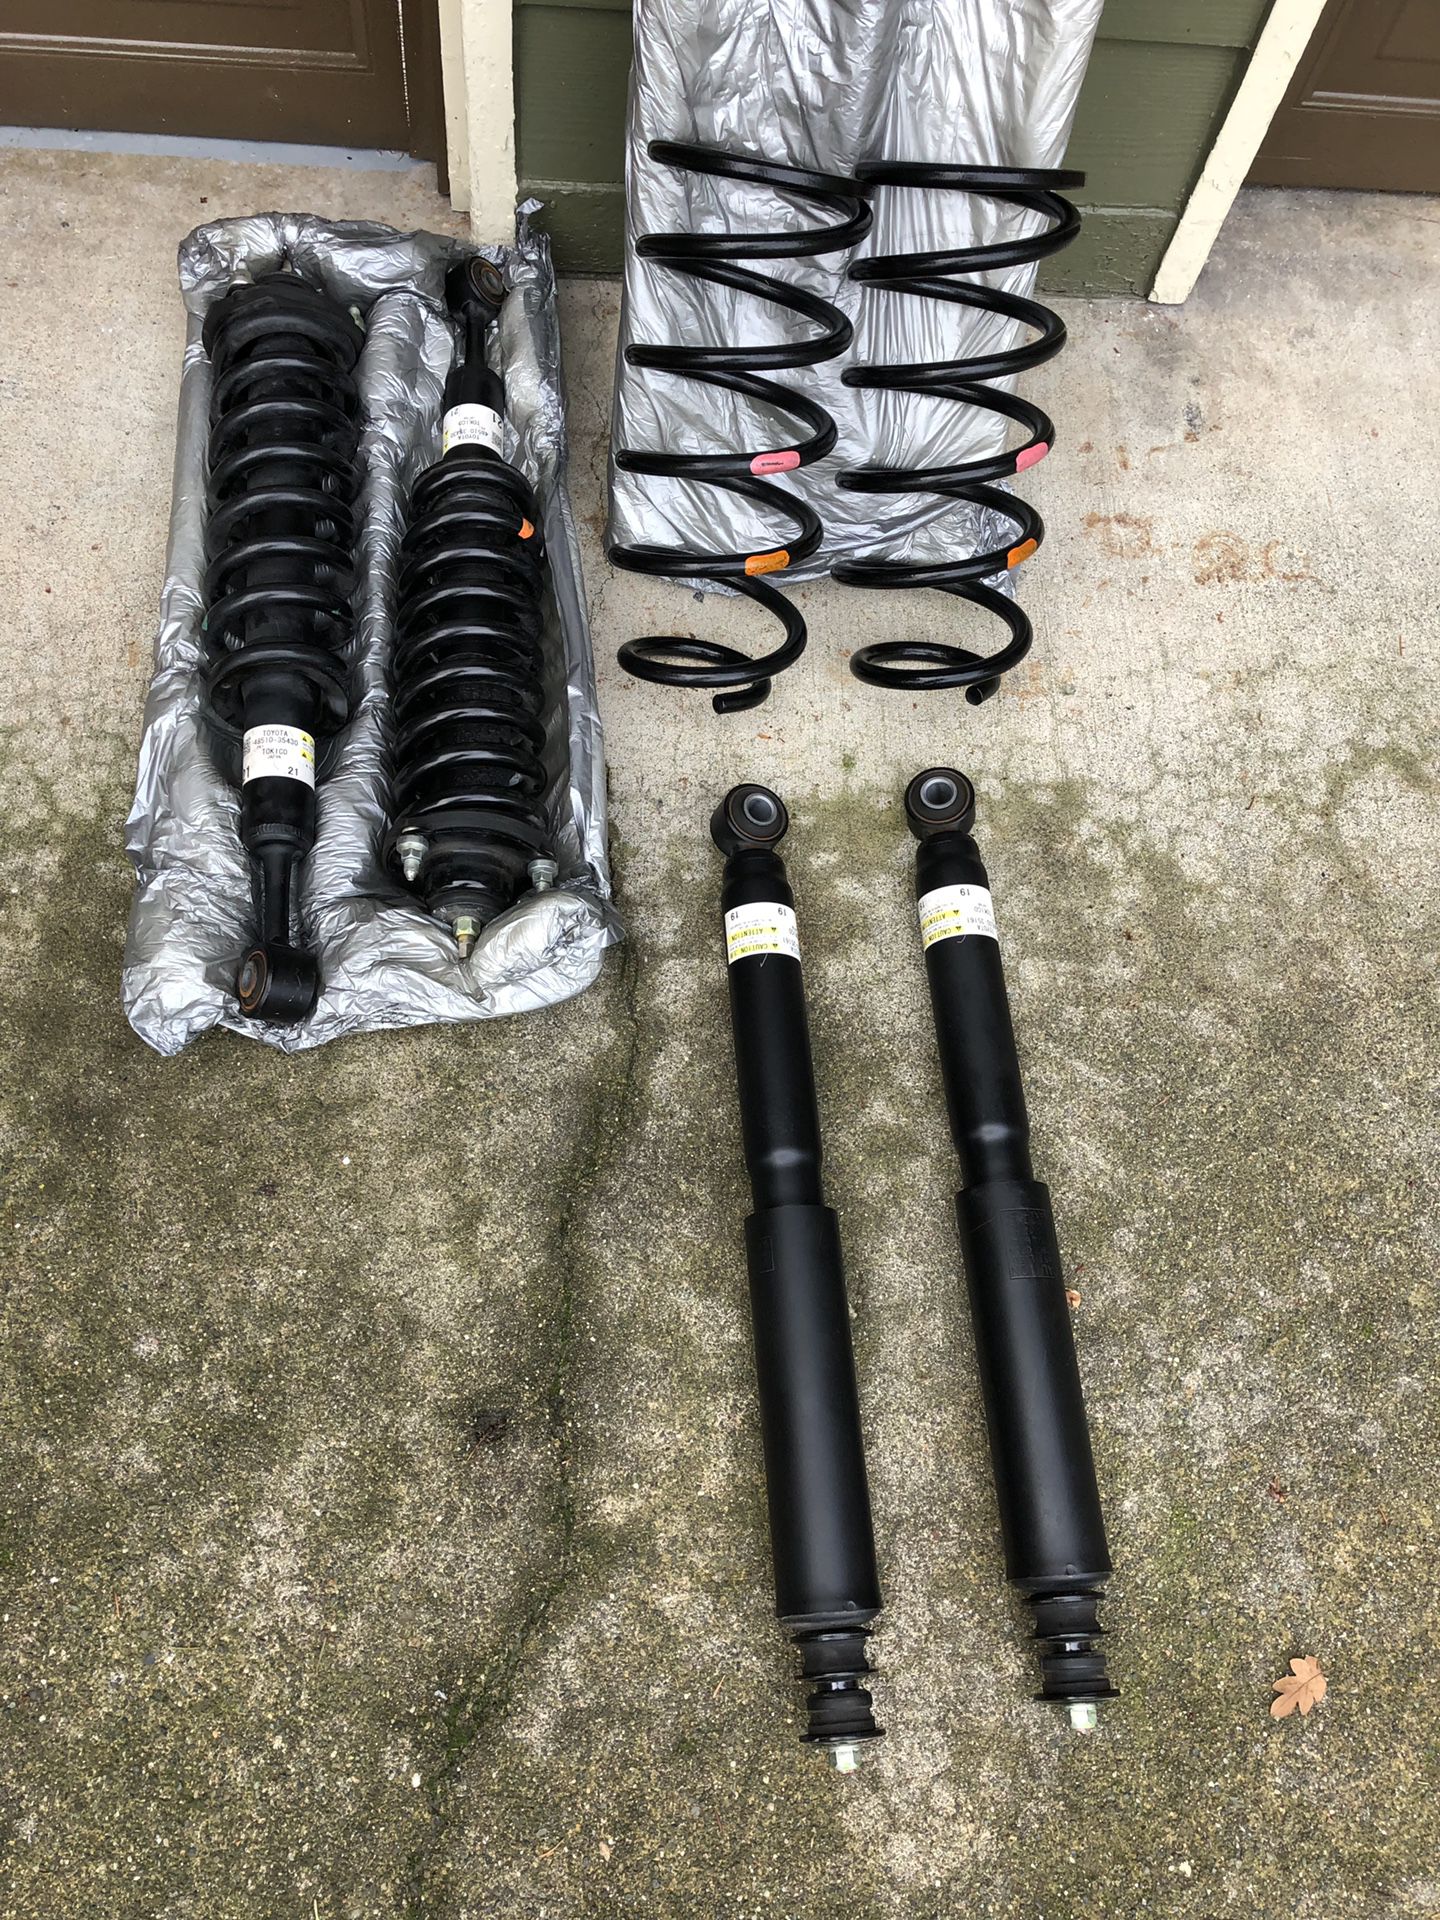 2019 Toyota 4Runner, springs with struts